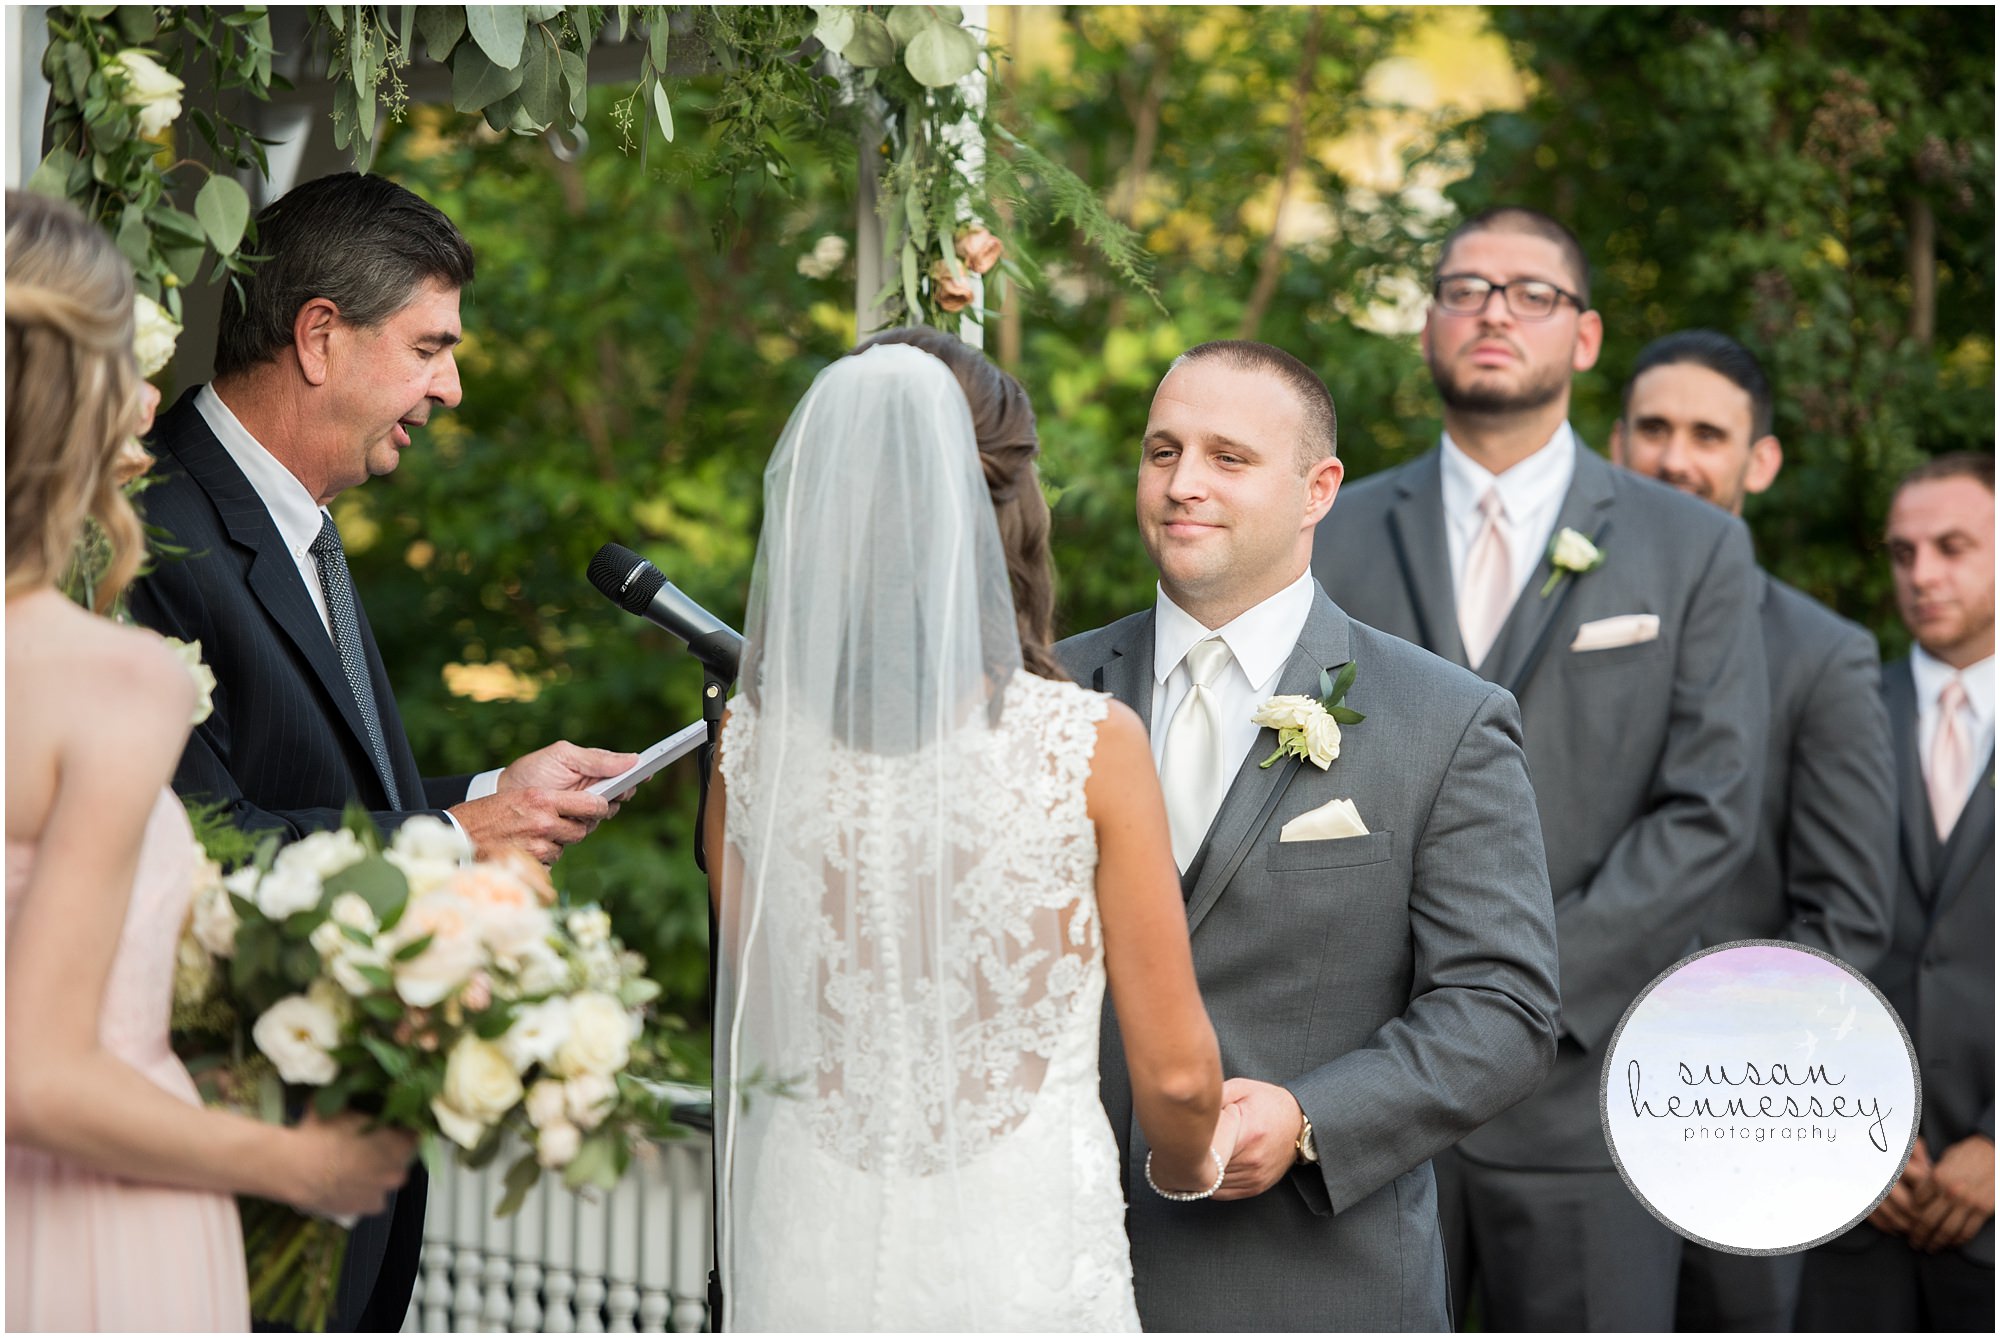 Ceremony at Old York Country Club